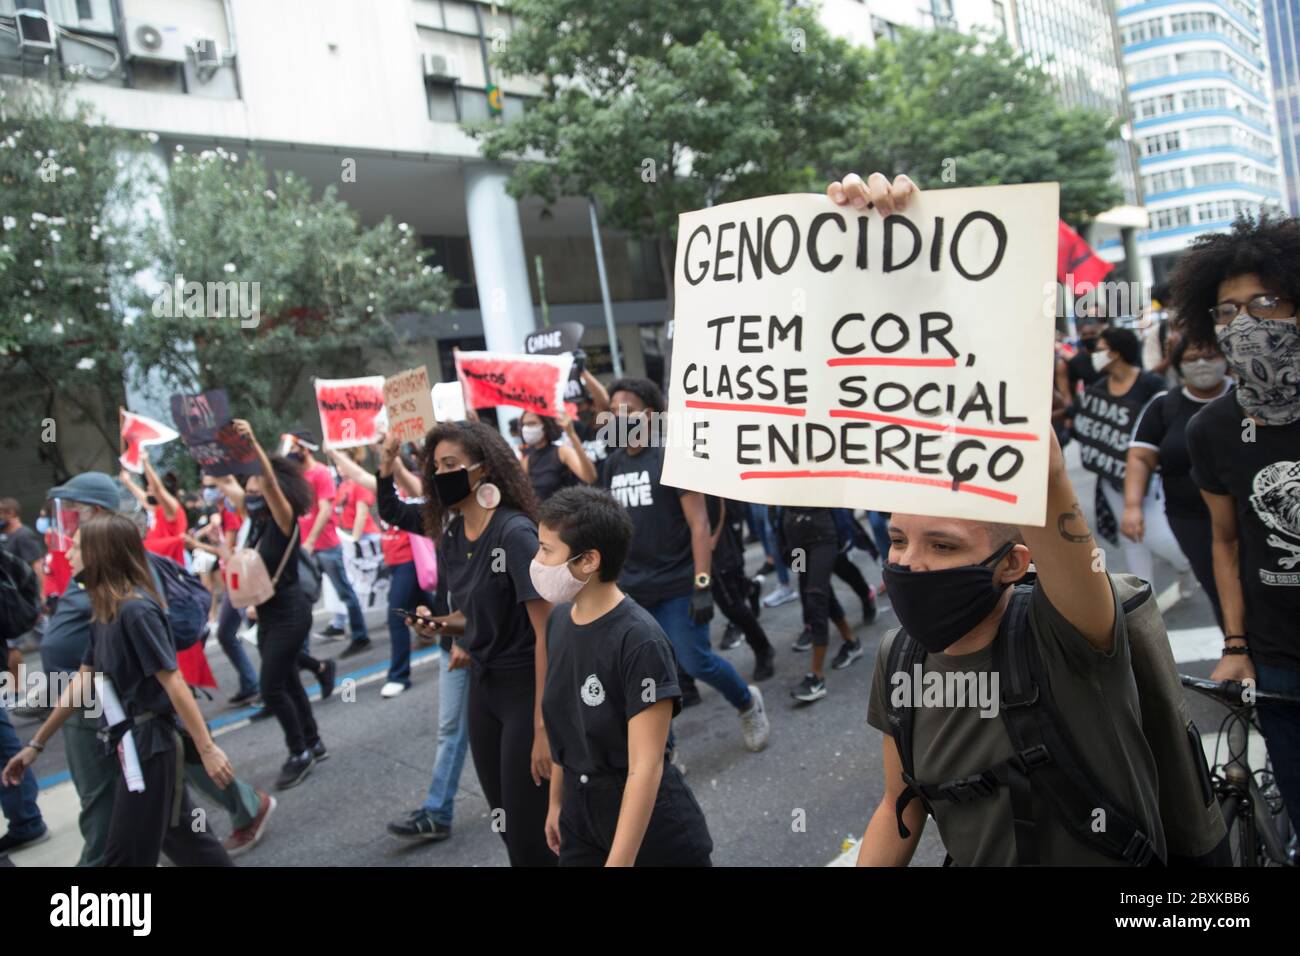 Rio de Janeiro, Brazil. 7th June, 2020. Protesters took to the streets during the Covid-19 pandemic, during a Black Lives Matter rally, in protest against the racism and death of black people, including George Floyd in the USA, and Joao Pedro in Rio. In the photo, a demonstrator holds a sign that says "Genocide has color, social class and address". Credit: Fernando Souza/ZUMA Wire/Alamy Live News Stock Photo